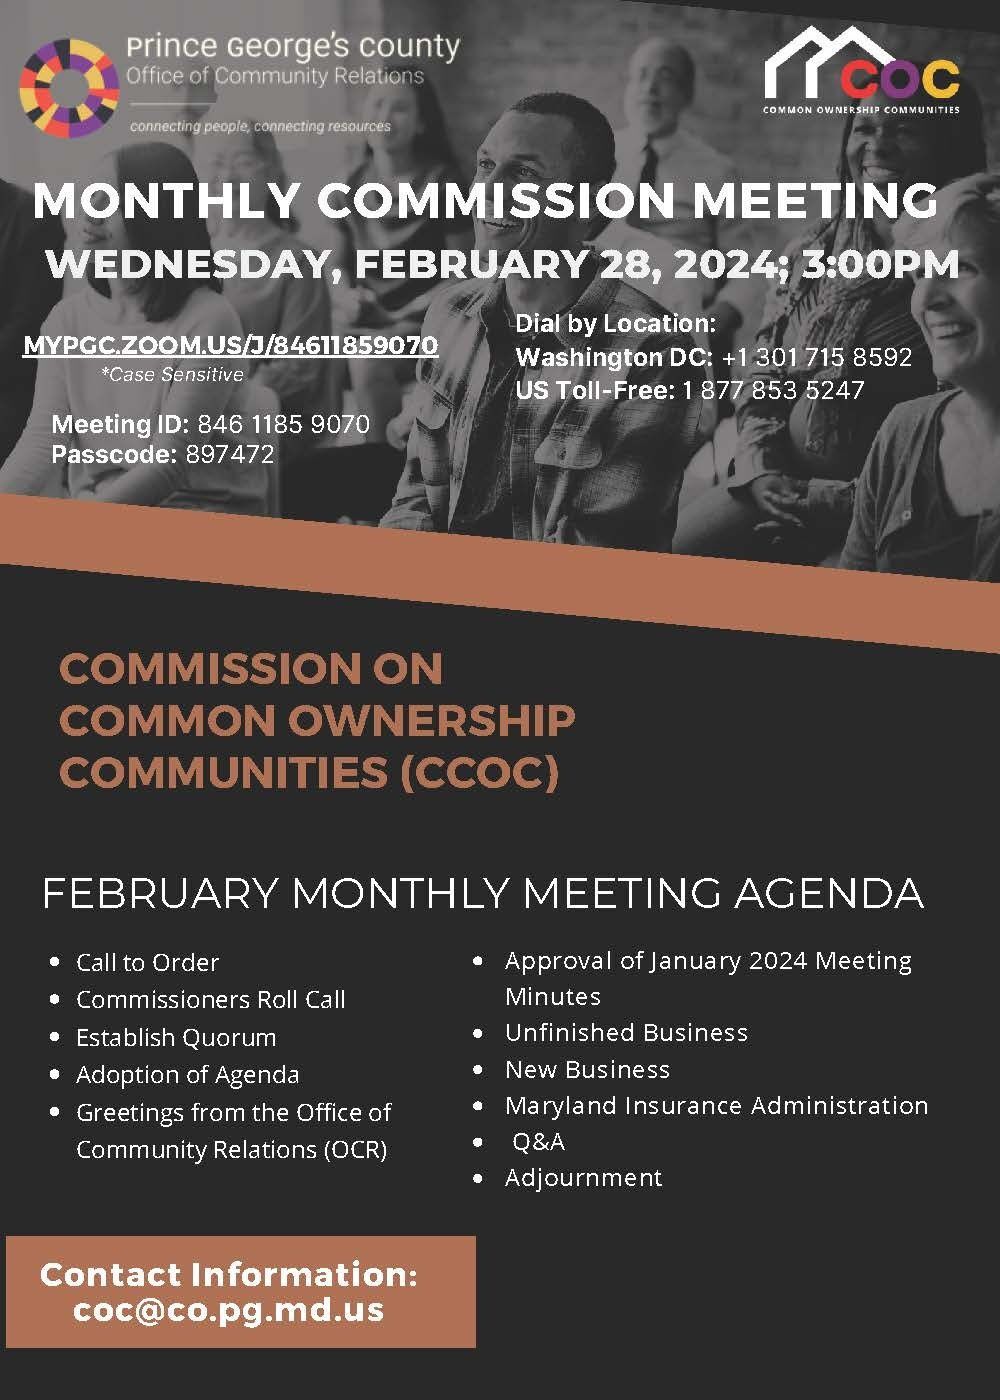 flyer announcing Prince George's County community relations monthly commission meeting on February 28 @ 4pm 